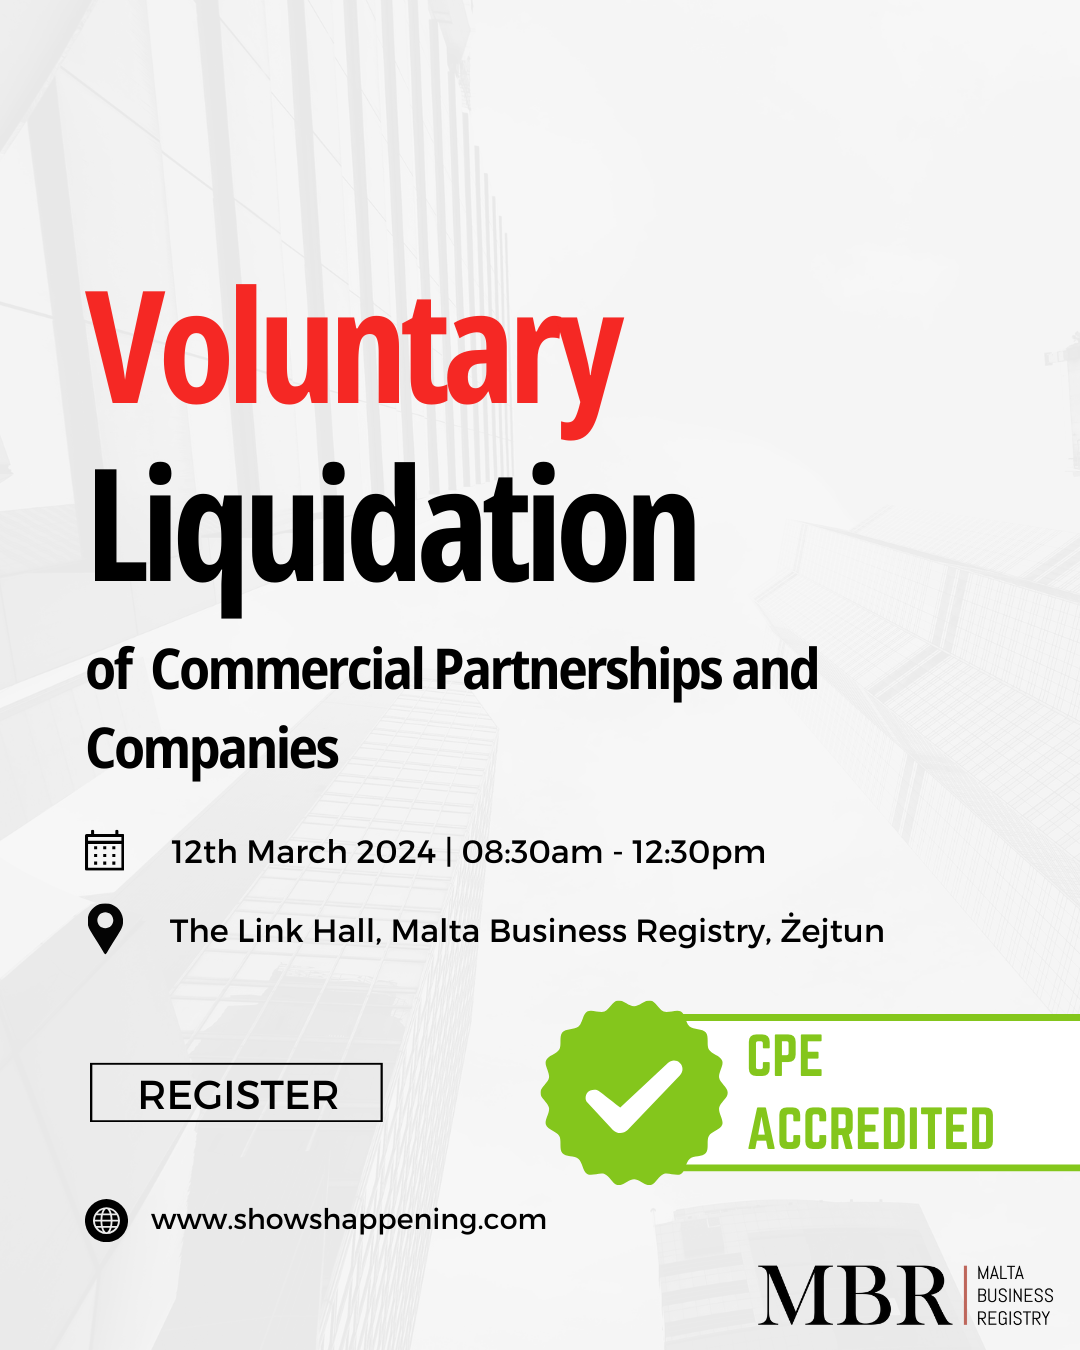 Voluntary Liquidation of Commercial Partnerships and Companies poster